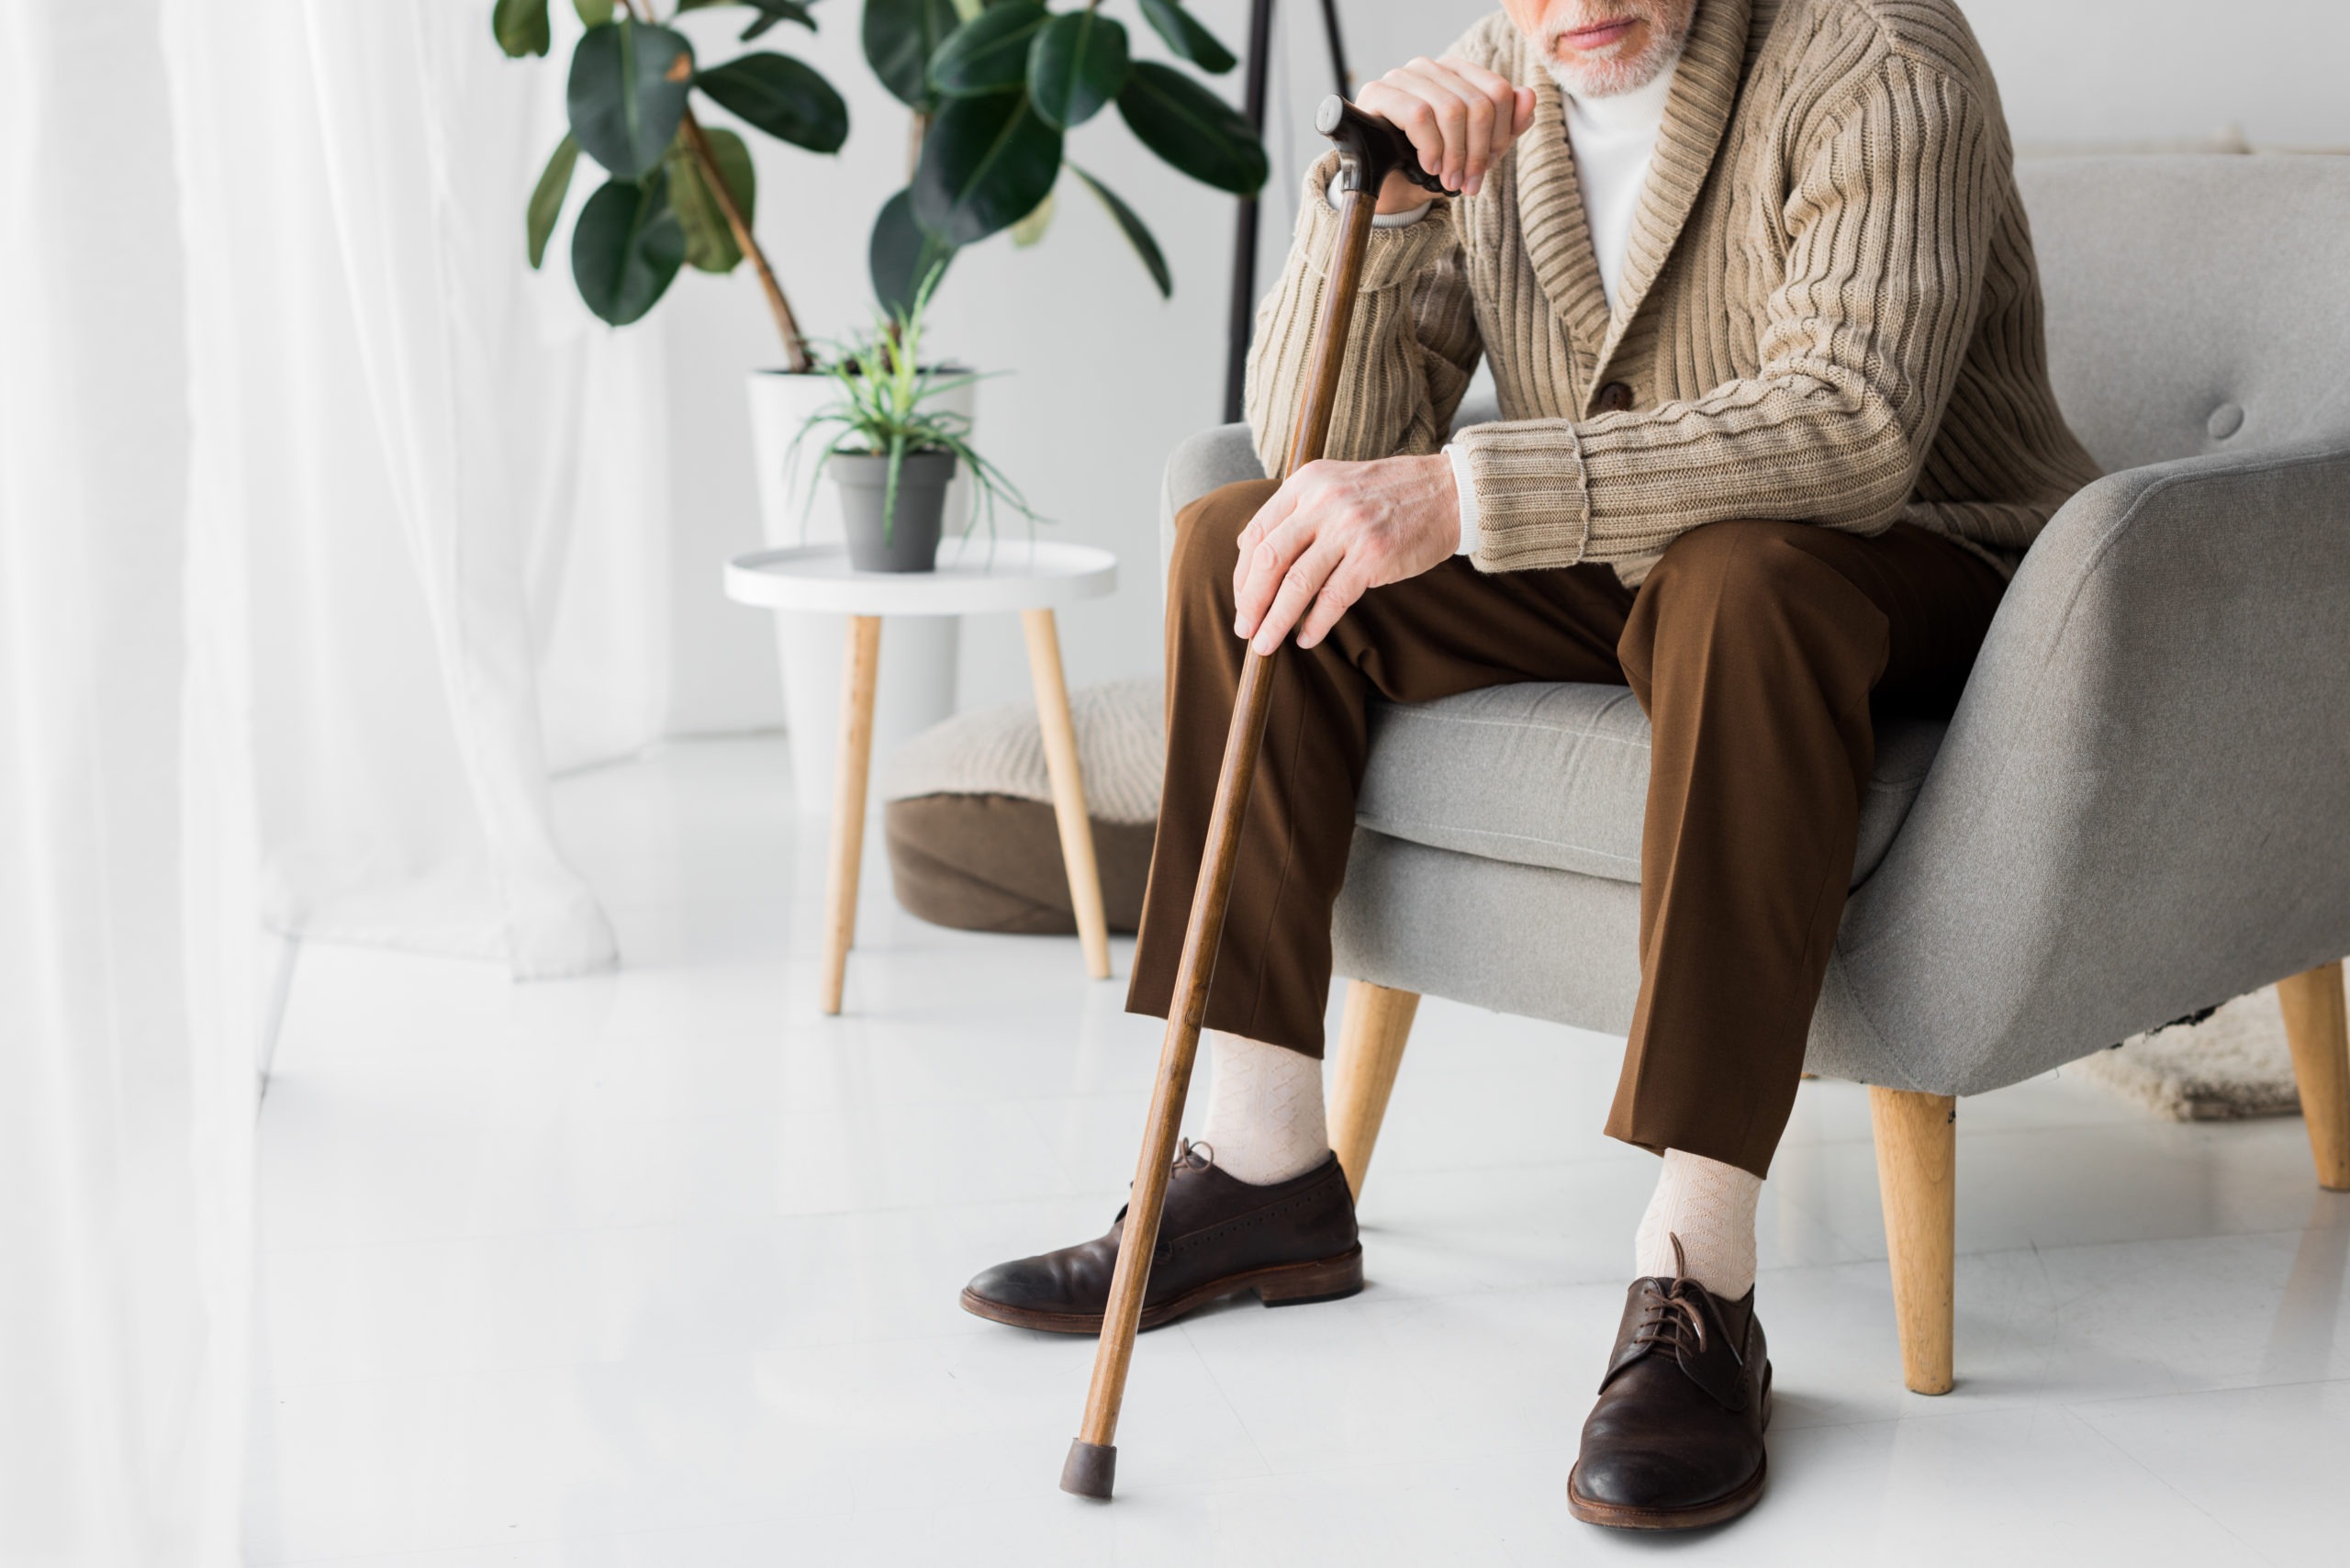 A stylish senior sits in a chair leaning forward onto his cane